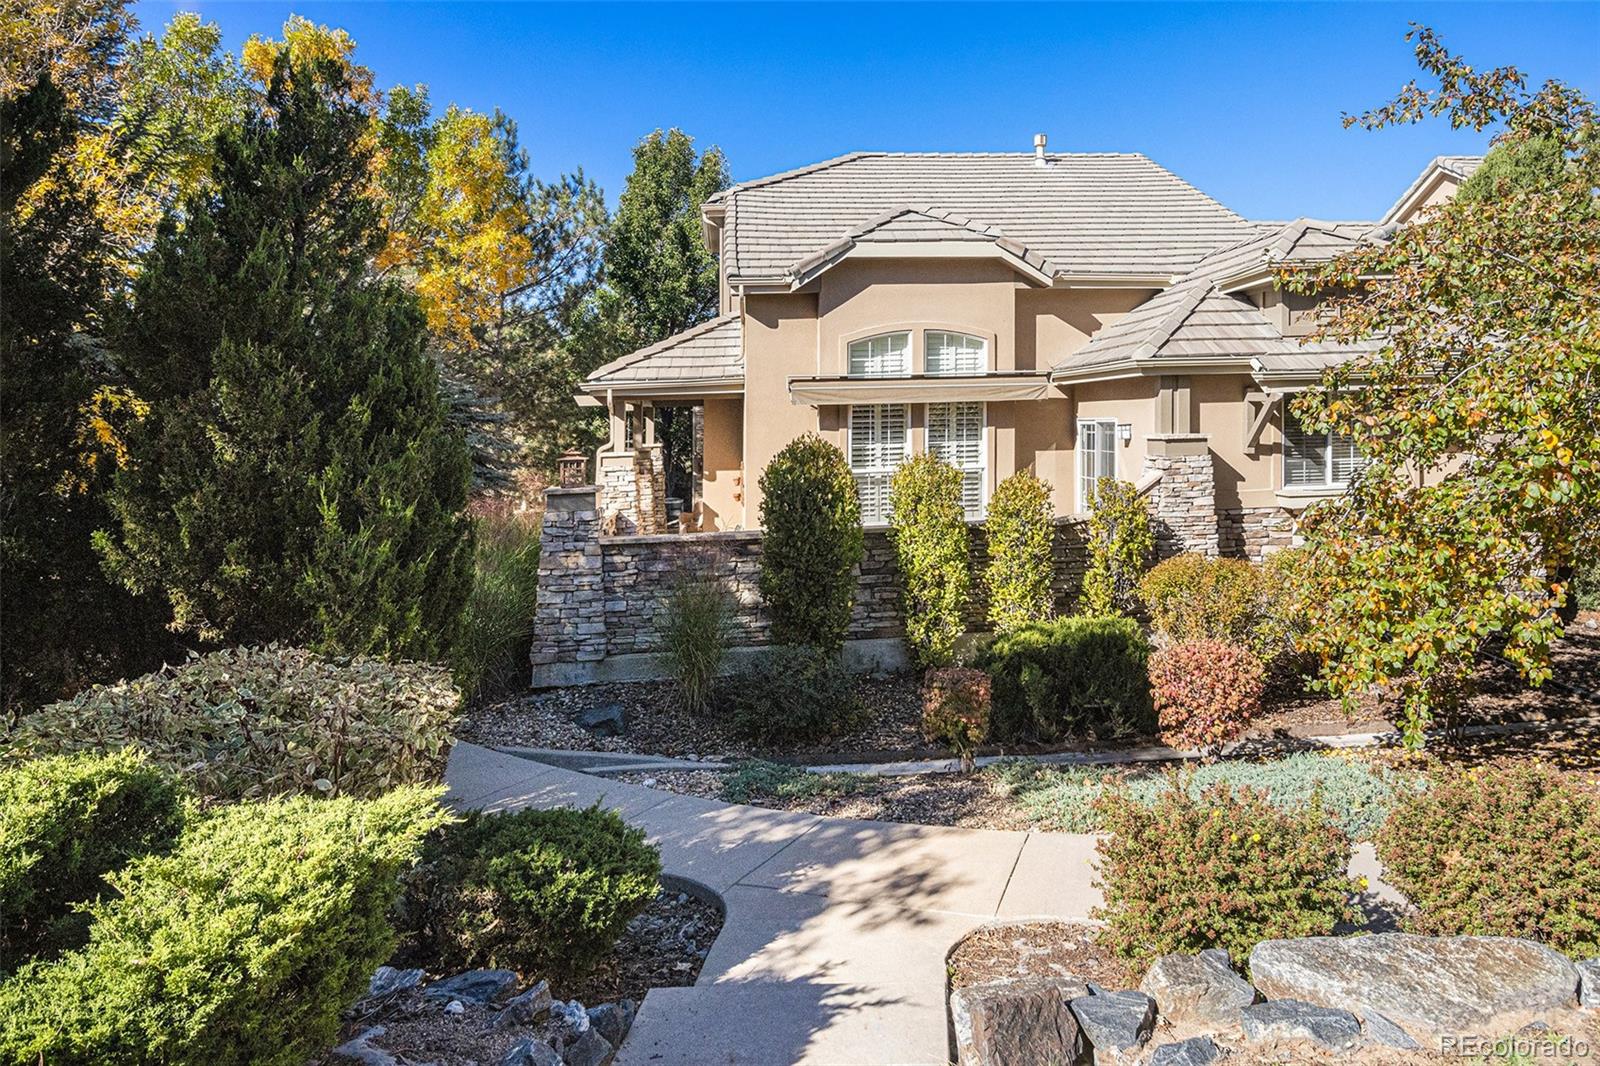 9002  old tom morris circle, Highlands Ranch sold home. Closed on 2024-04-26 for $710,000.